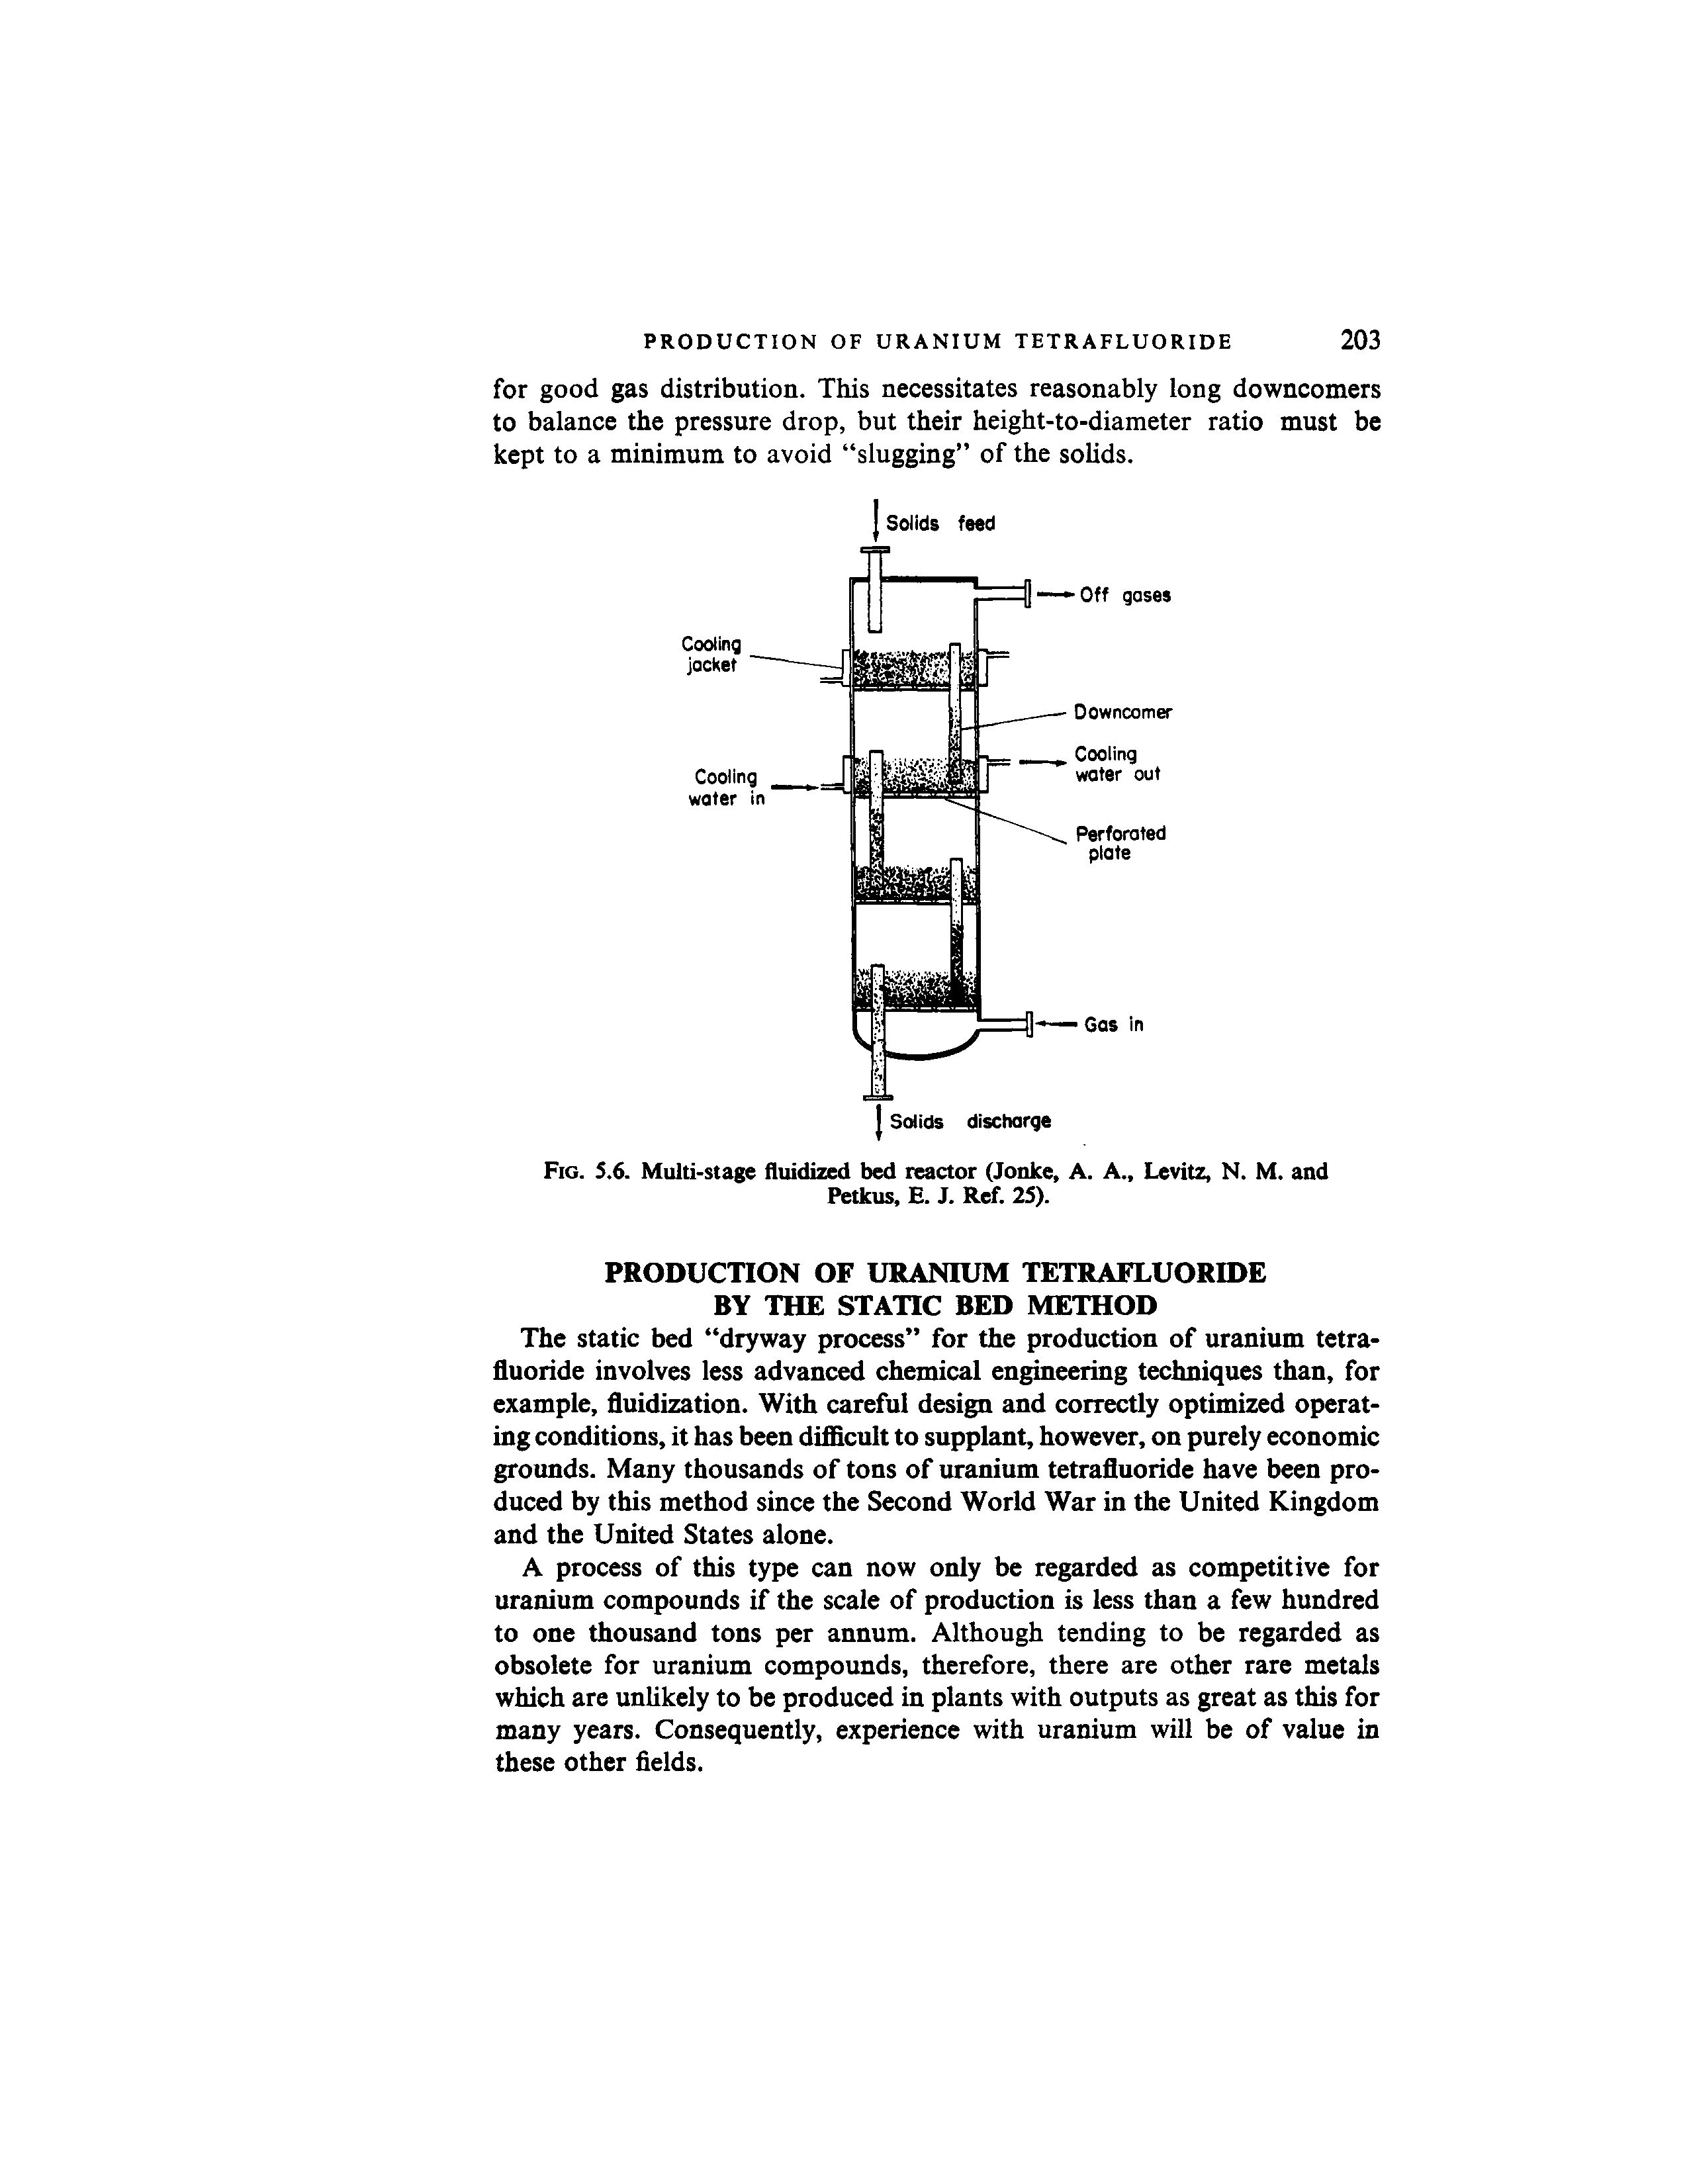 Fig. 5.6. Multi-stage fluidized bed reactor (Jonke, A. A., Levitz, N. M. and Petkus, E. J. Ref. 25).